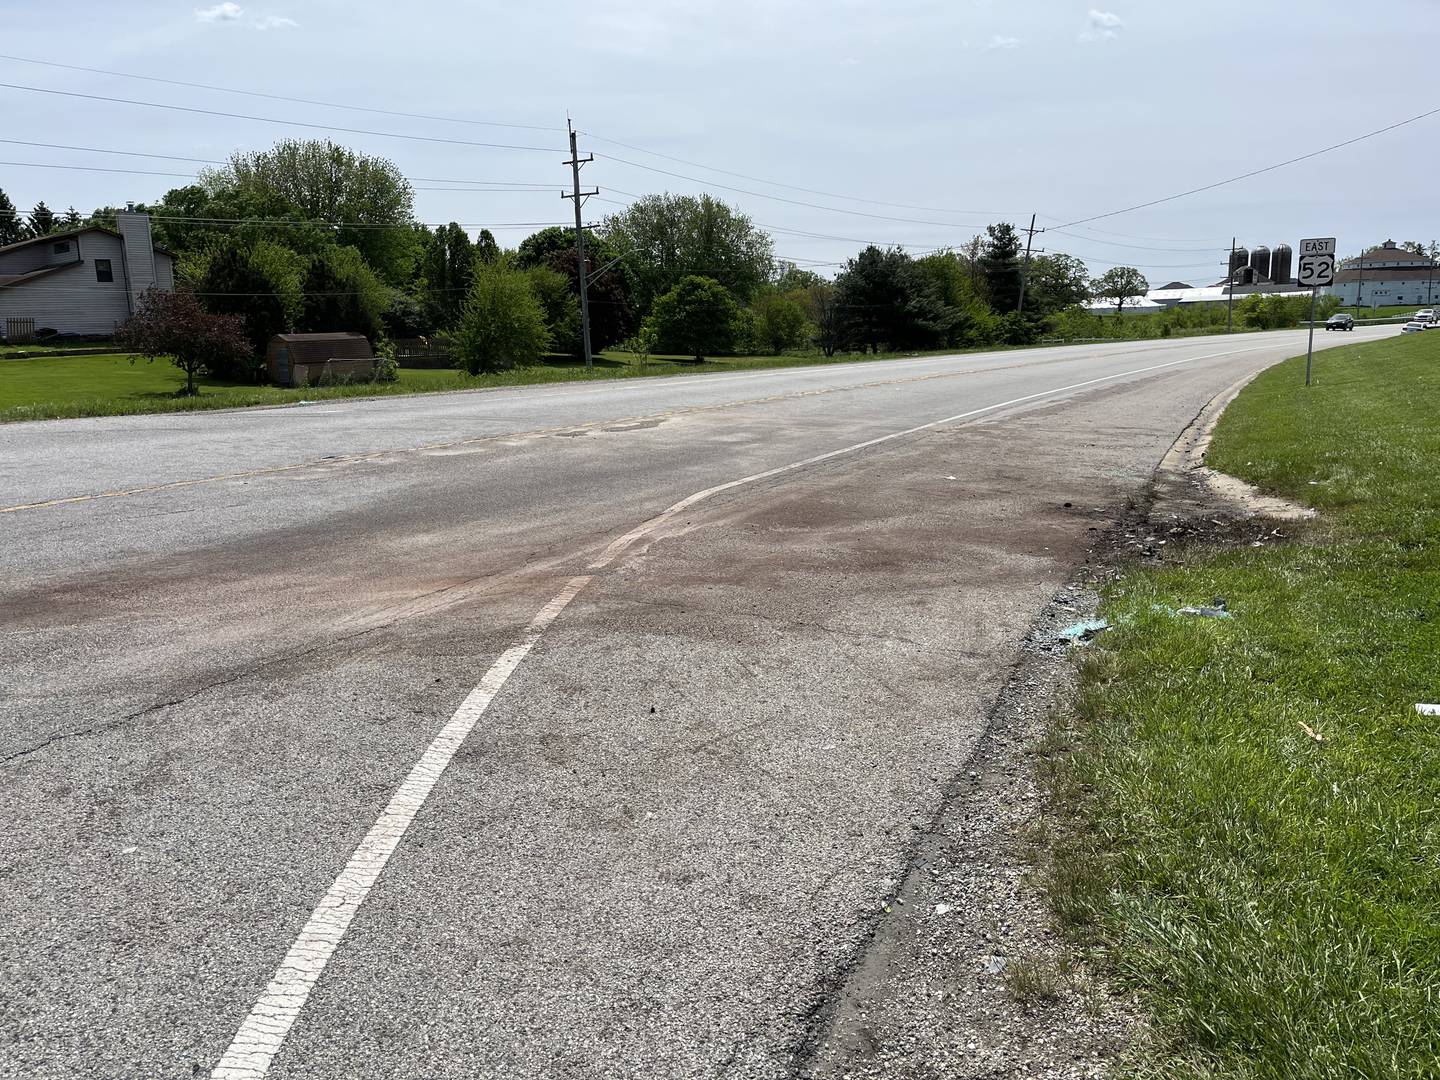 The intersection of Route 52 and Baker Road in Manhattan Township, seen on Sunday, May 22, 2022. Dark marks were still visible on the roadway where a crash occurred on Saturday, May 21, 2022, that left three people dead.